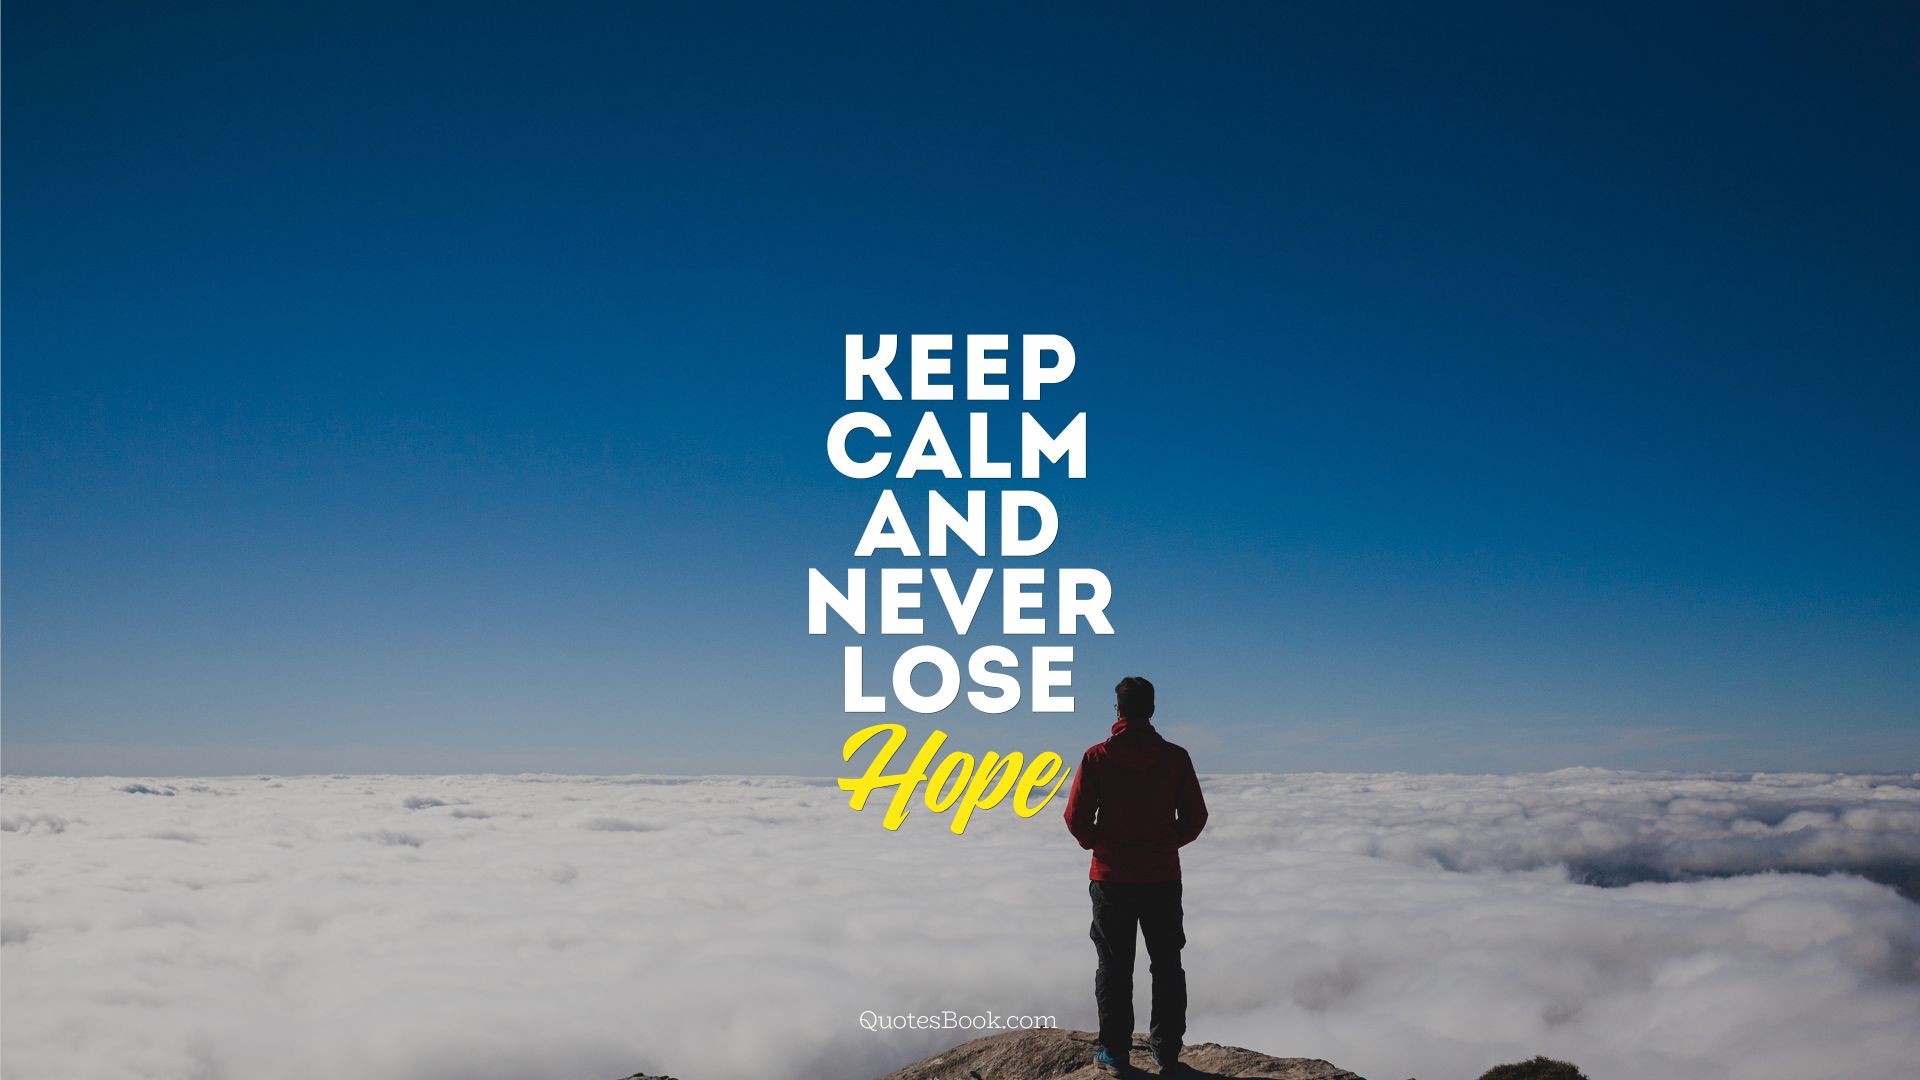 Keep calm and never lose hope   QuotesBook